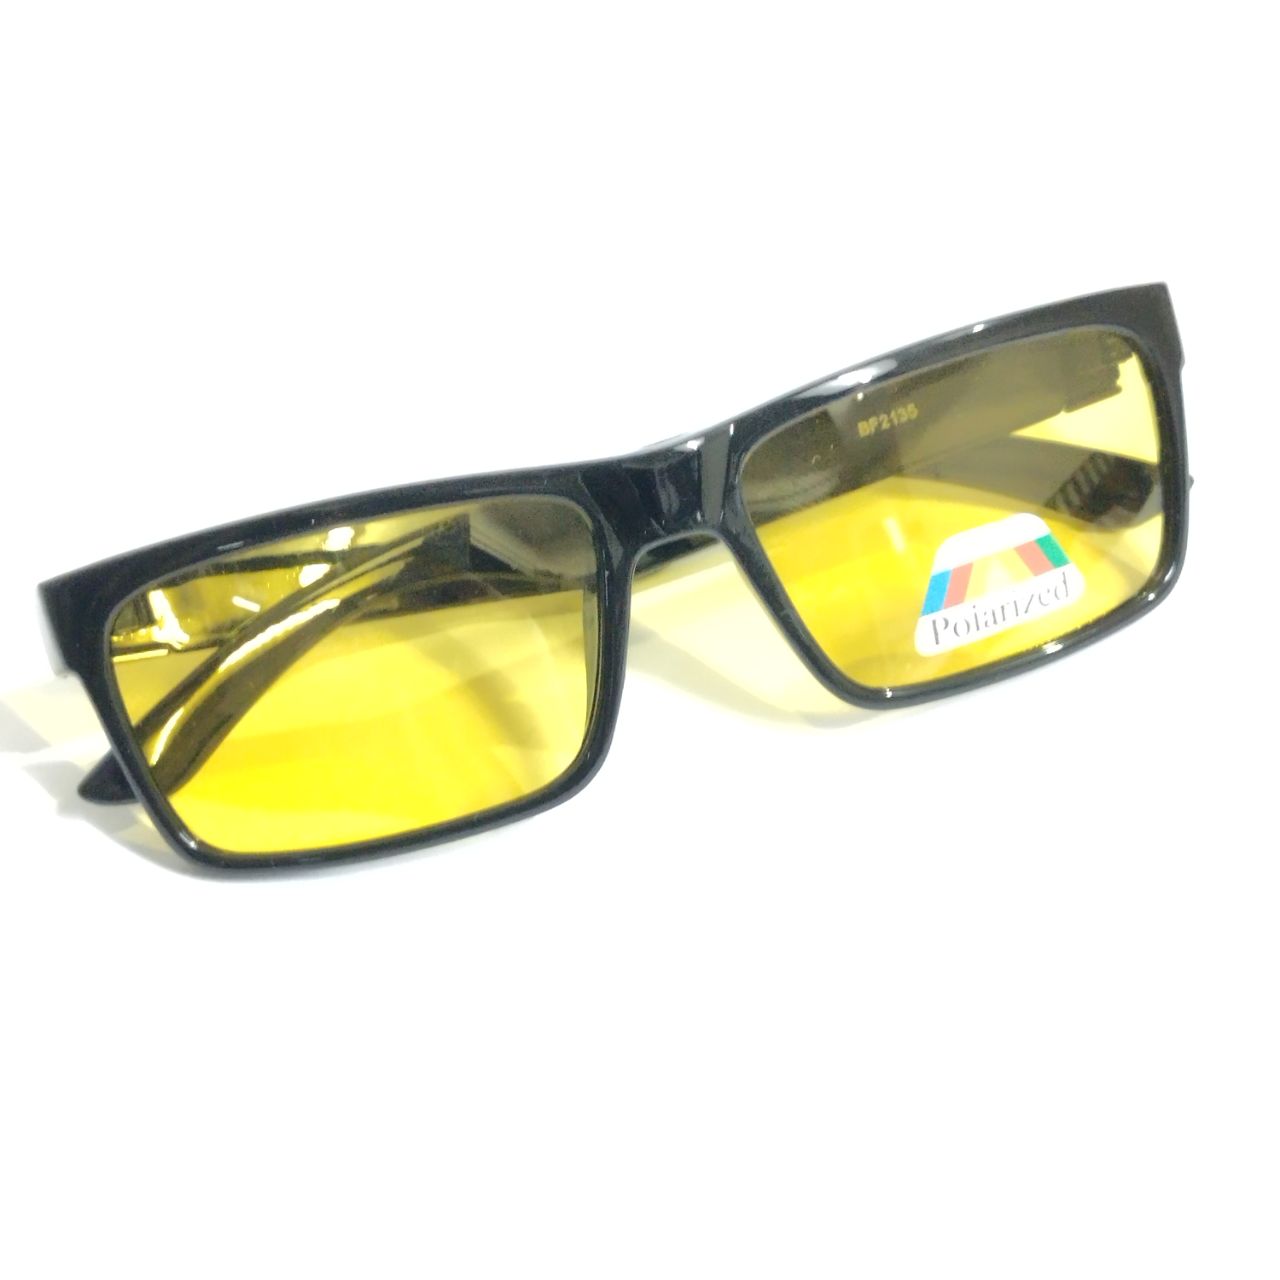 Night Driving Sunglassea with HD Vision Polarized Yellow Lenses